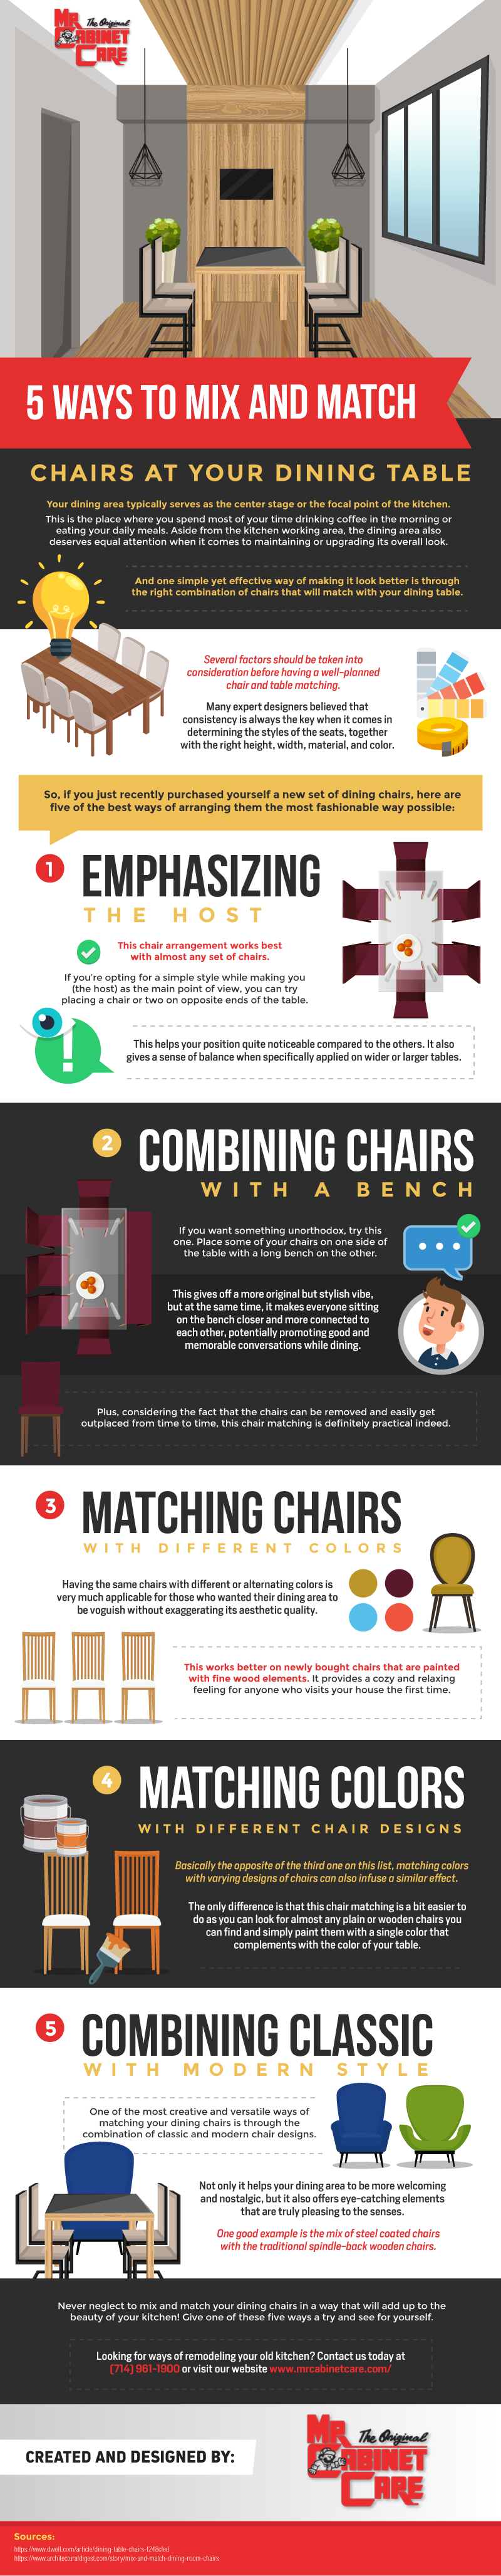 5 Ways to Mix and Match Chairs at your Dining Table - Infographic